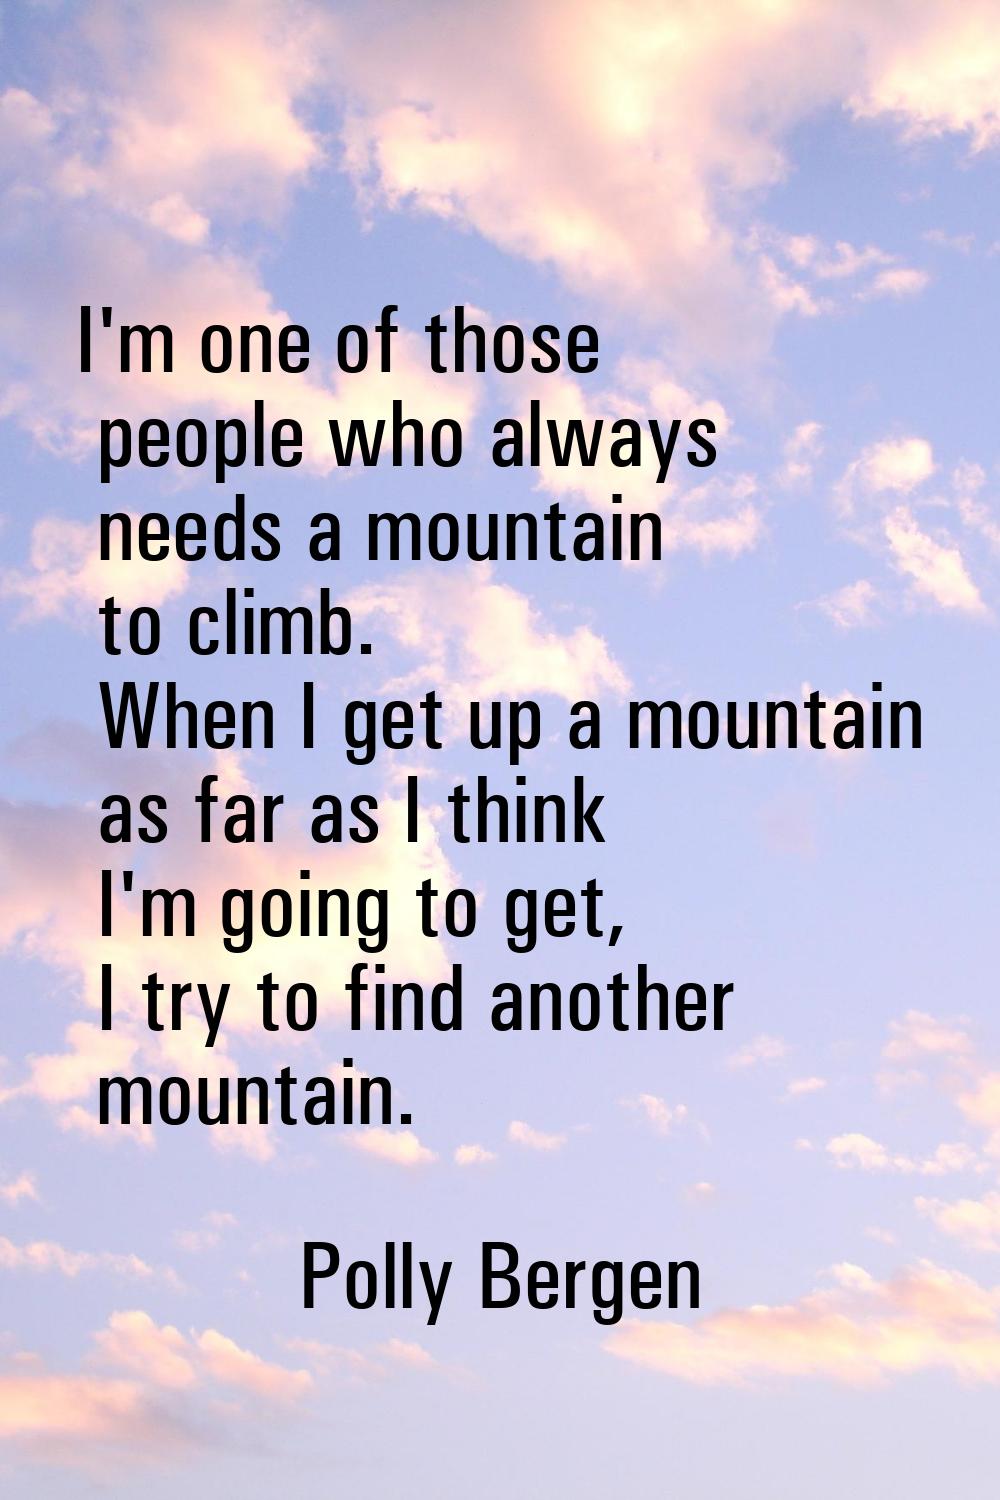 I'm one of those people who always needs a mountain to climb. When I get up a mountain as far as I 